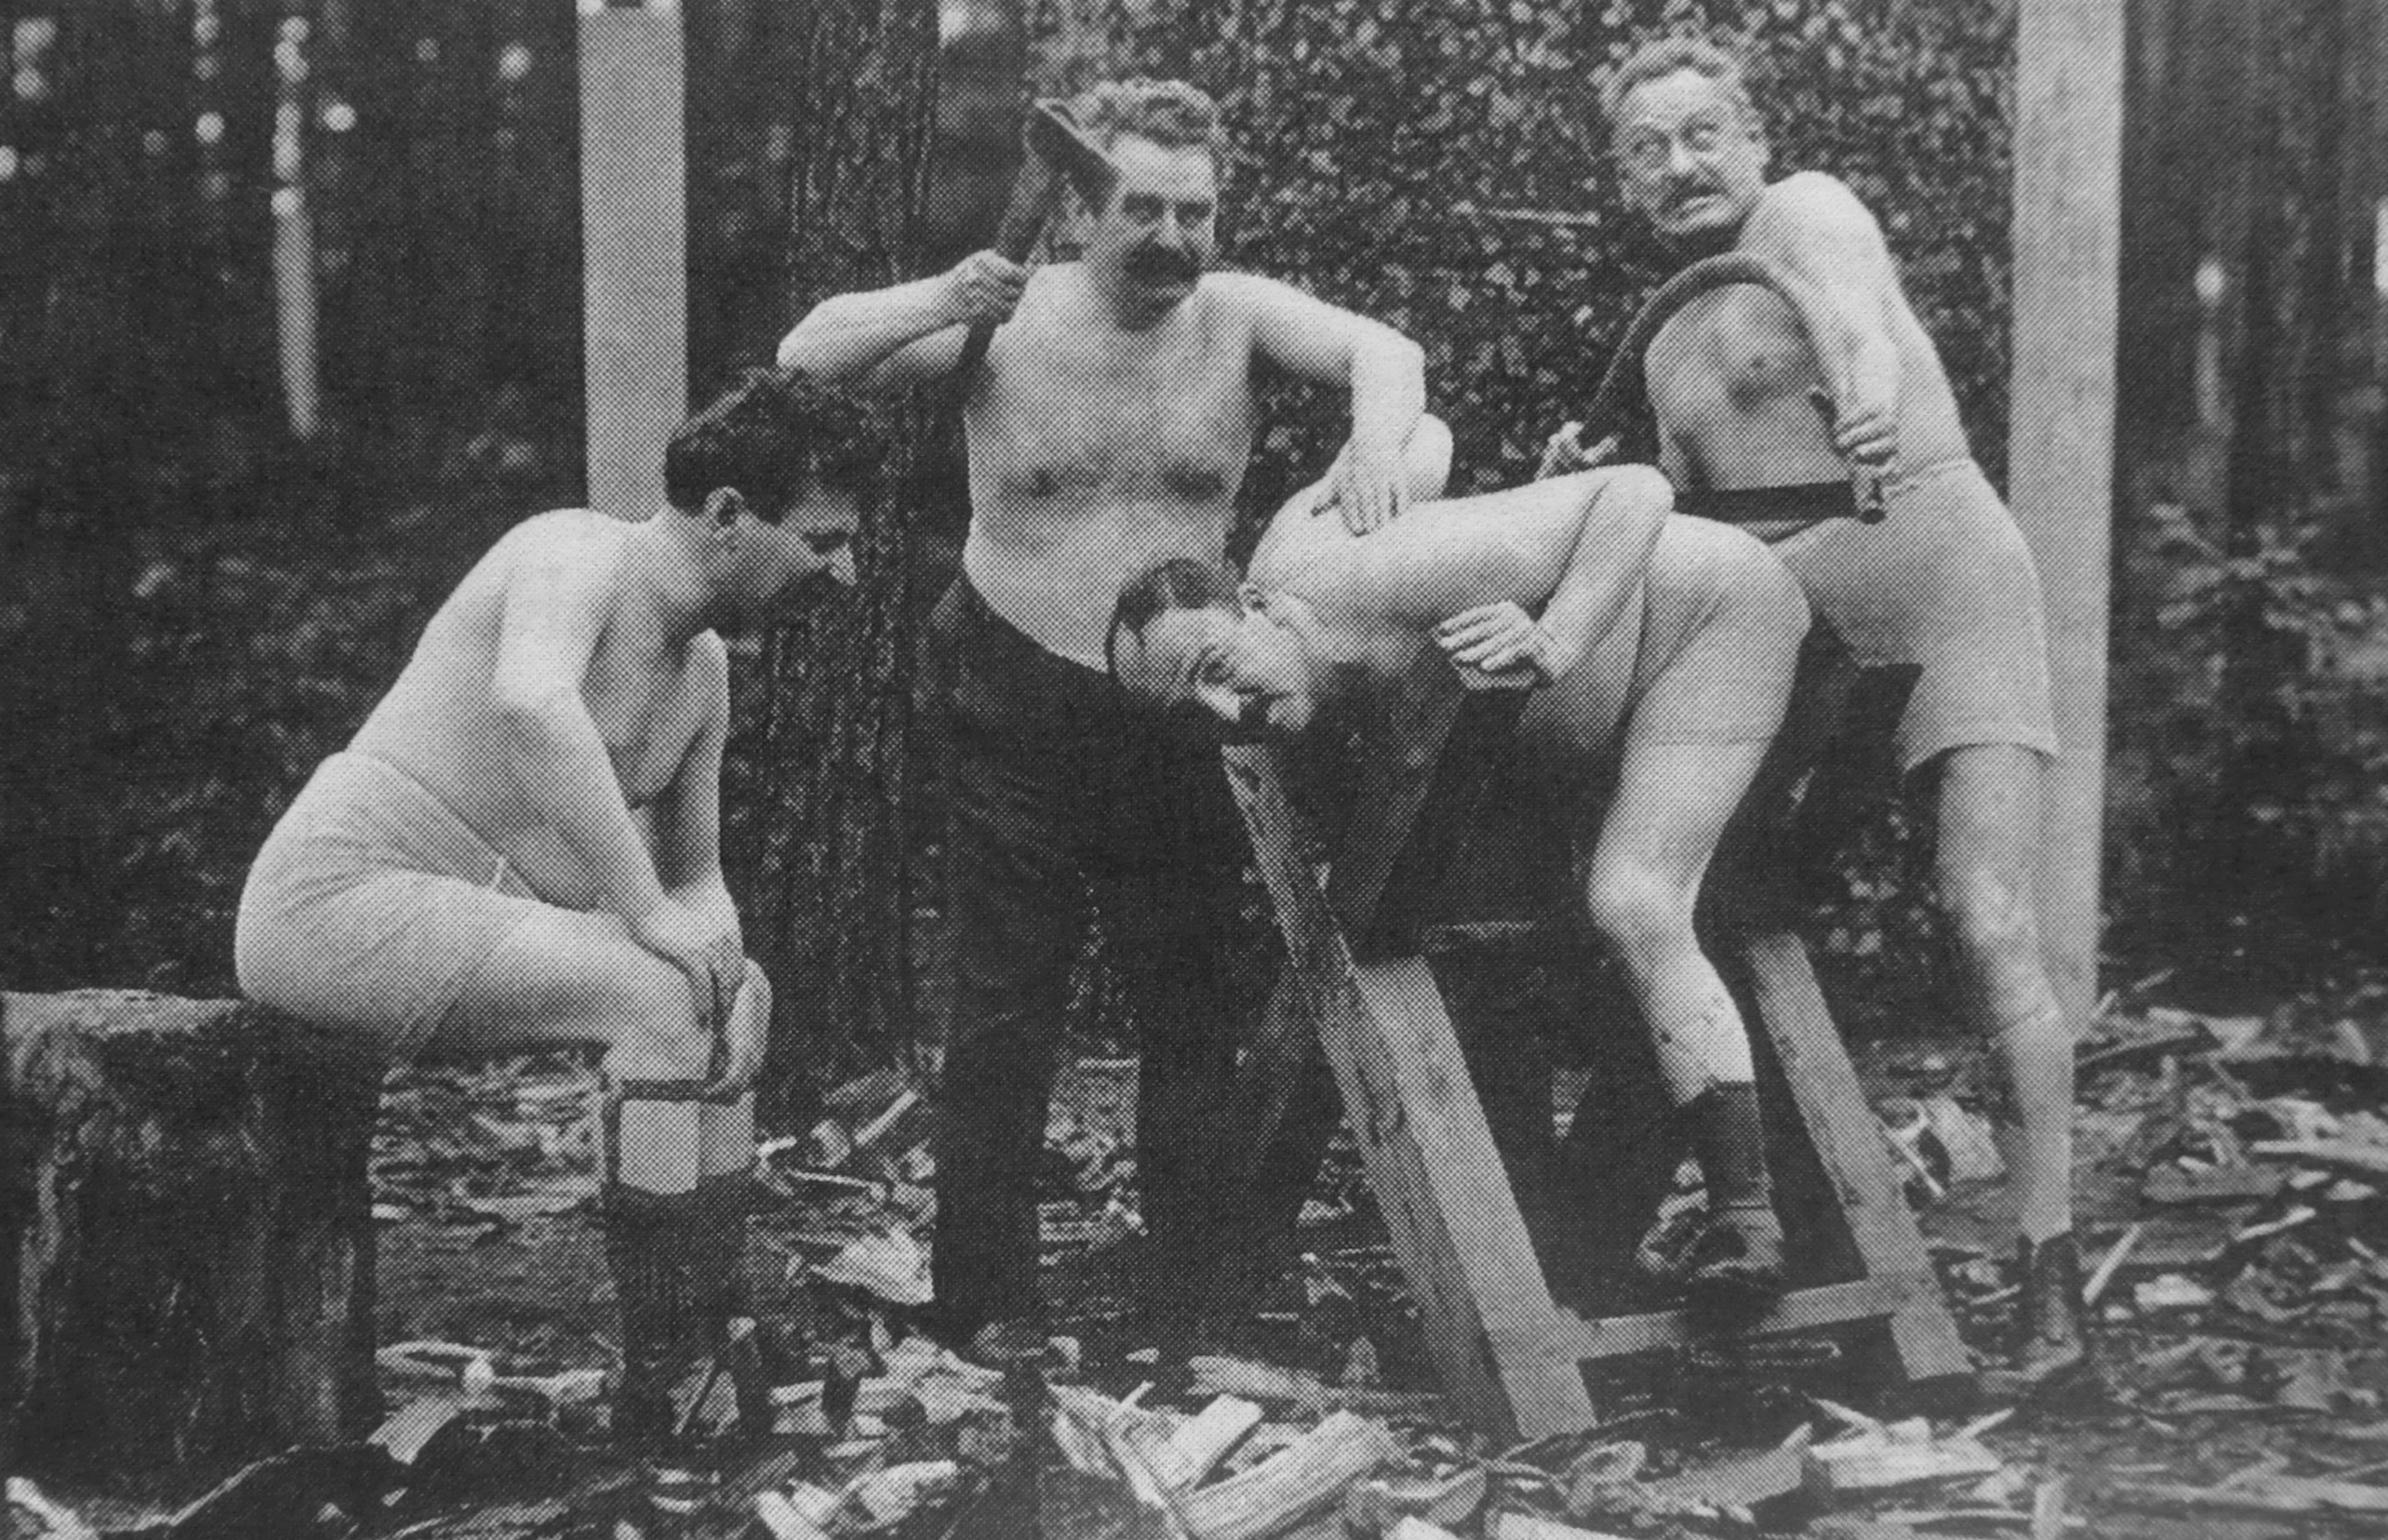 One of the few private photos showing Kálmán from his humerous side that he rarely displayed in public. Here, in 1914, he is horsing around with his "Csárdásfürstin" writing partners Leo Stein, Wilhelm Karczag and Bela Jenbach.